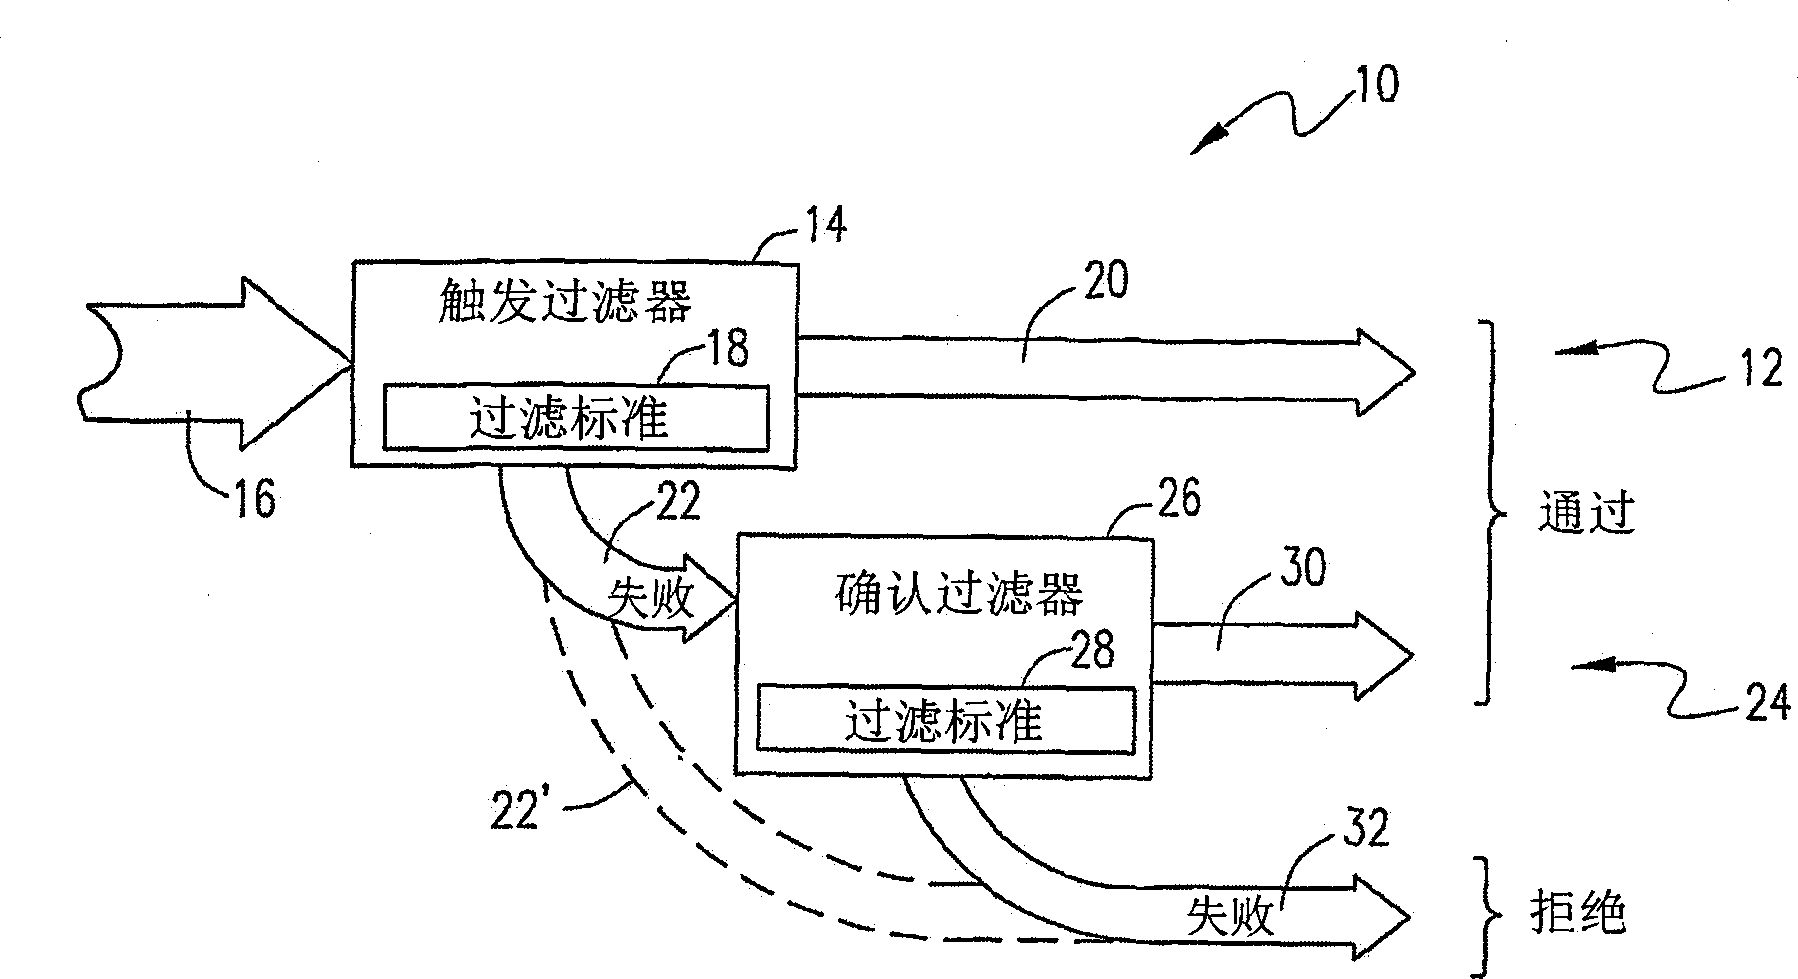 Multi-level packet screening with dynamically selected filtering criteria